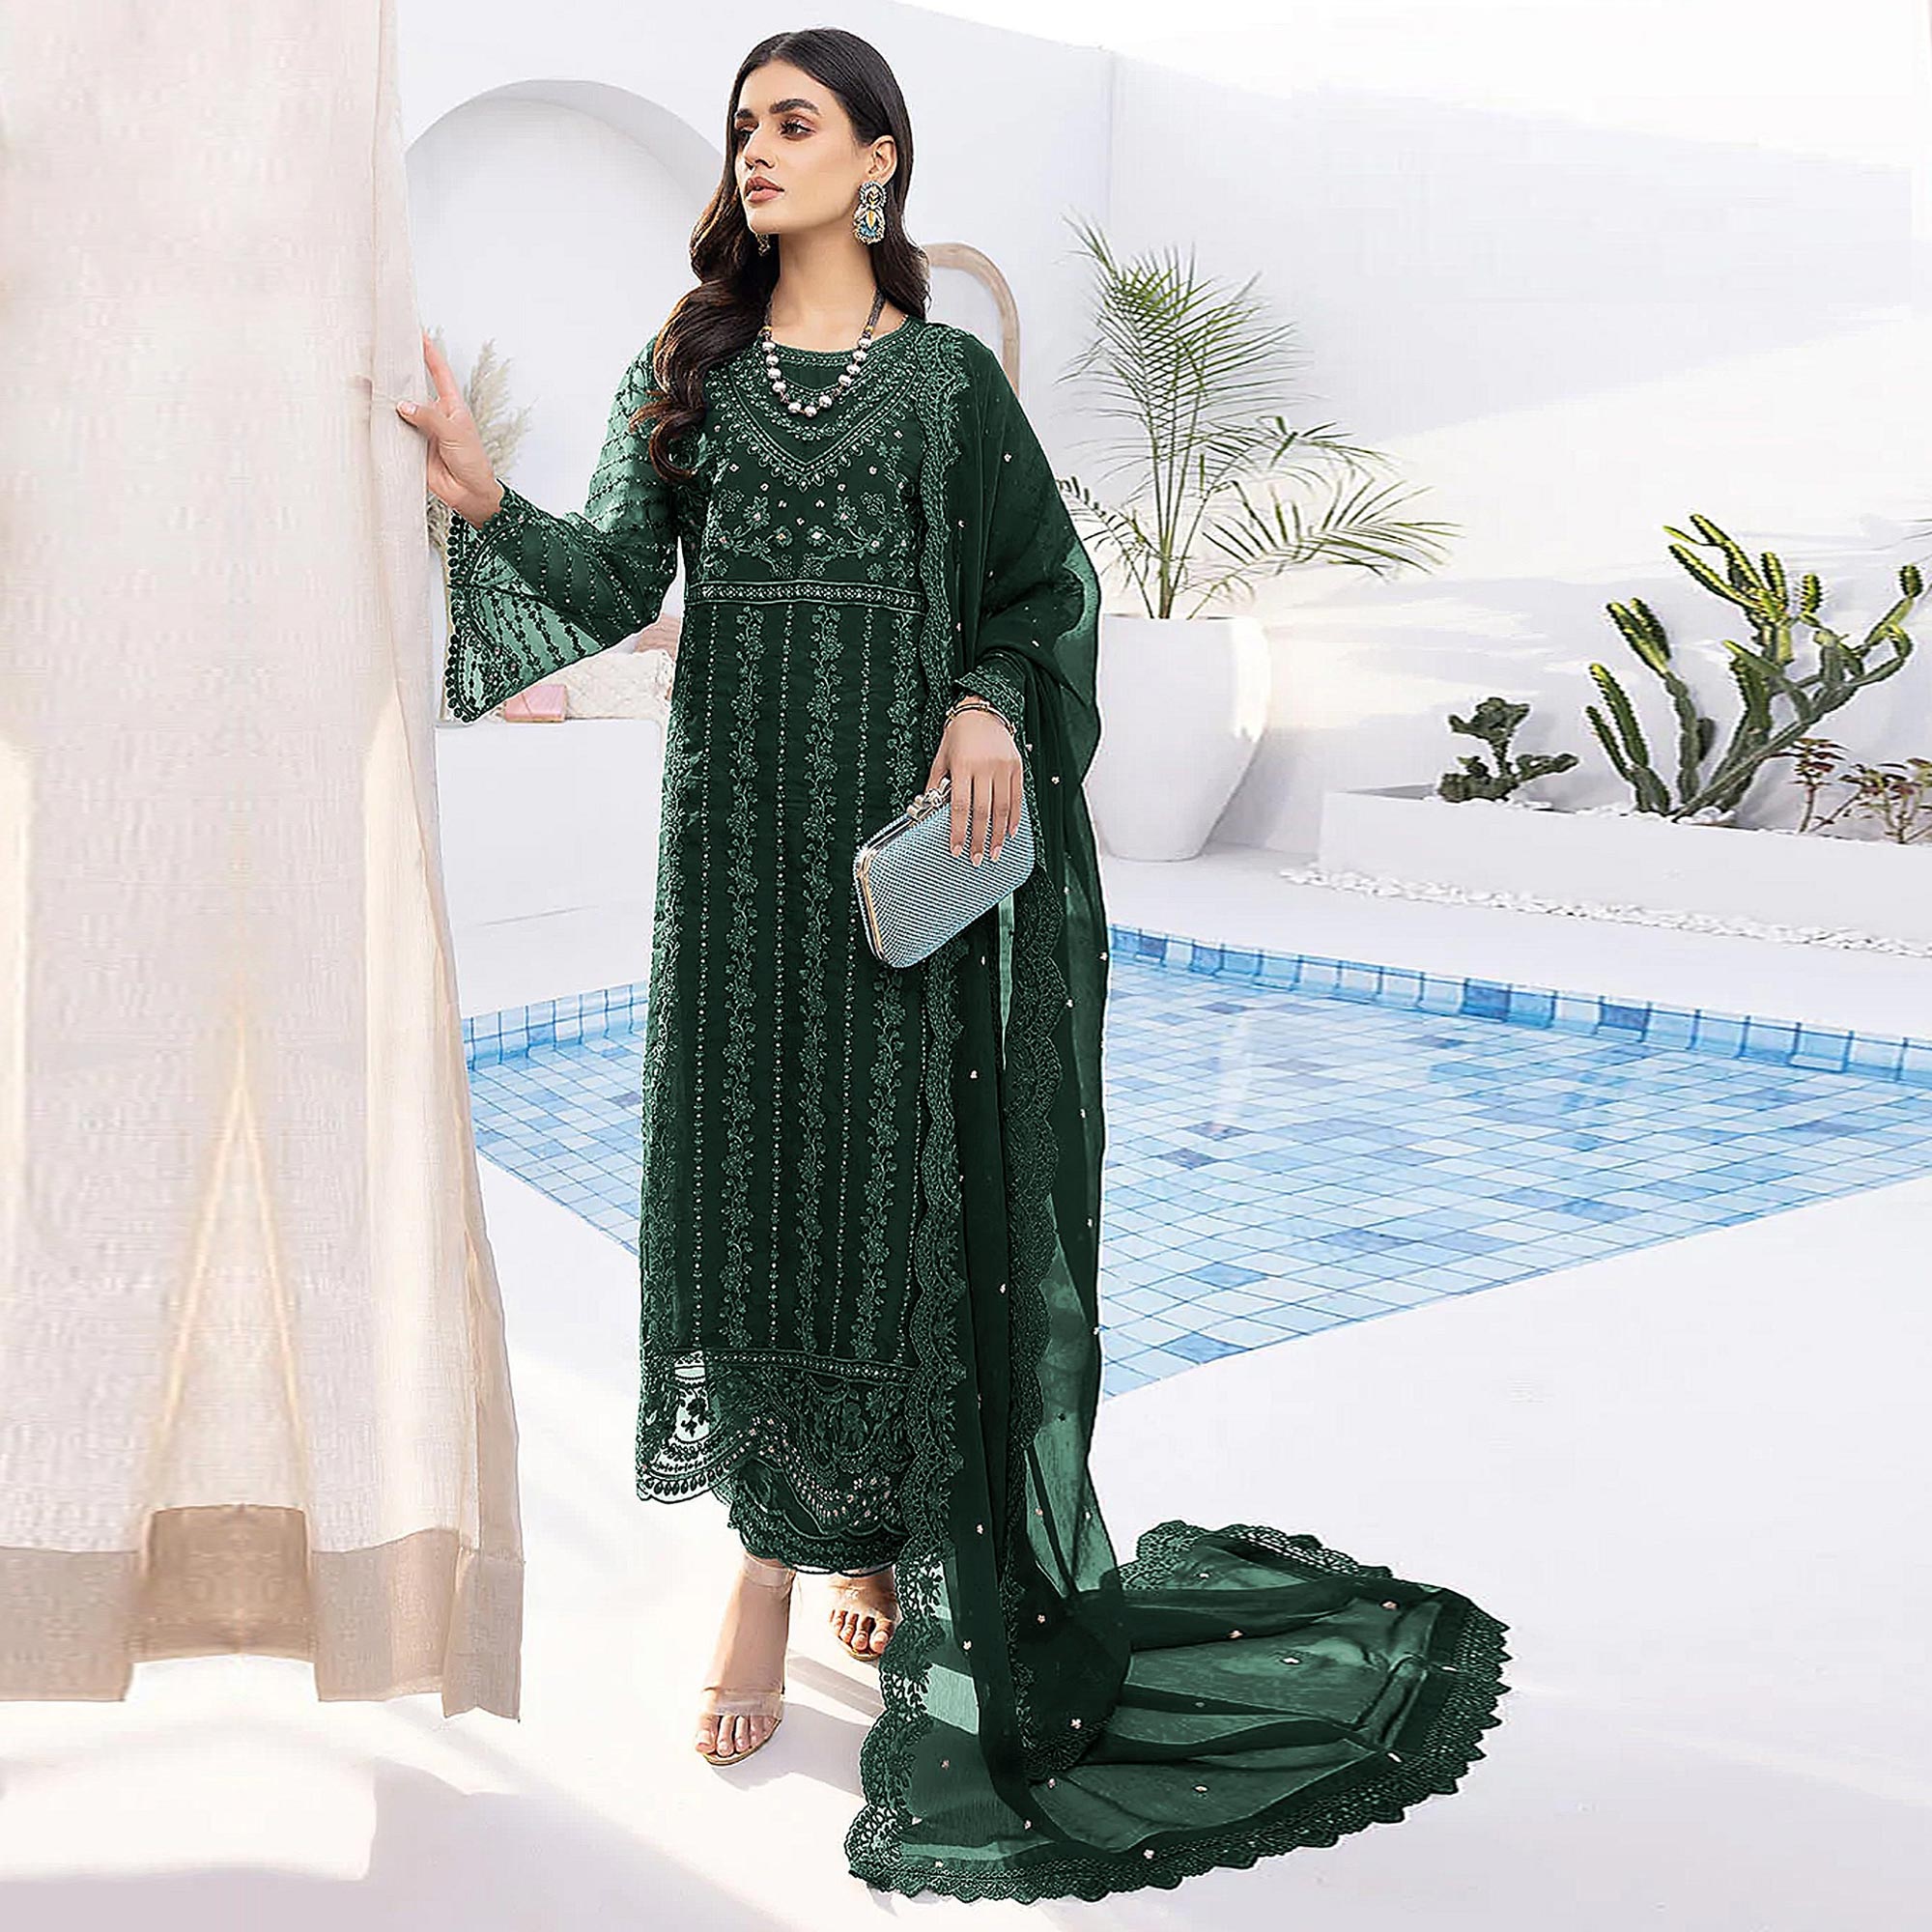 Bottle Green Floral Embroidered Organza Semi Stitched Suit